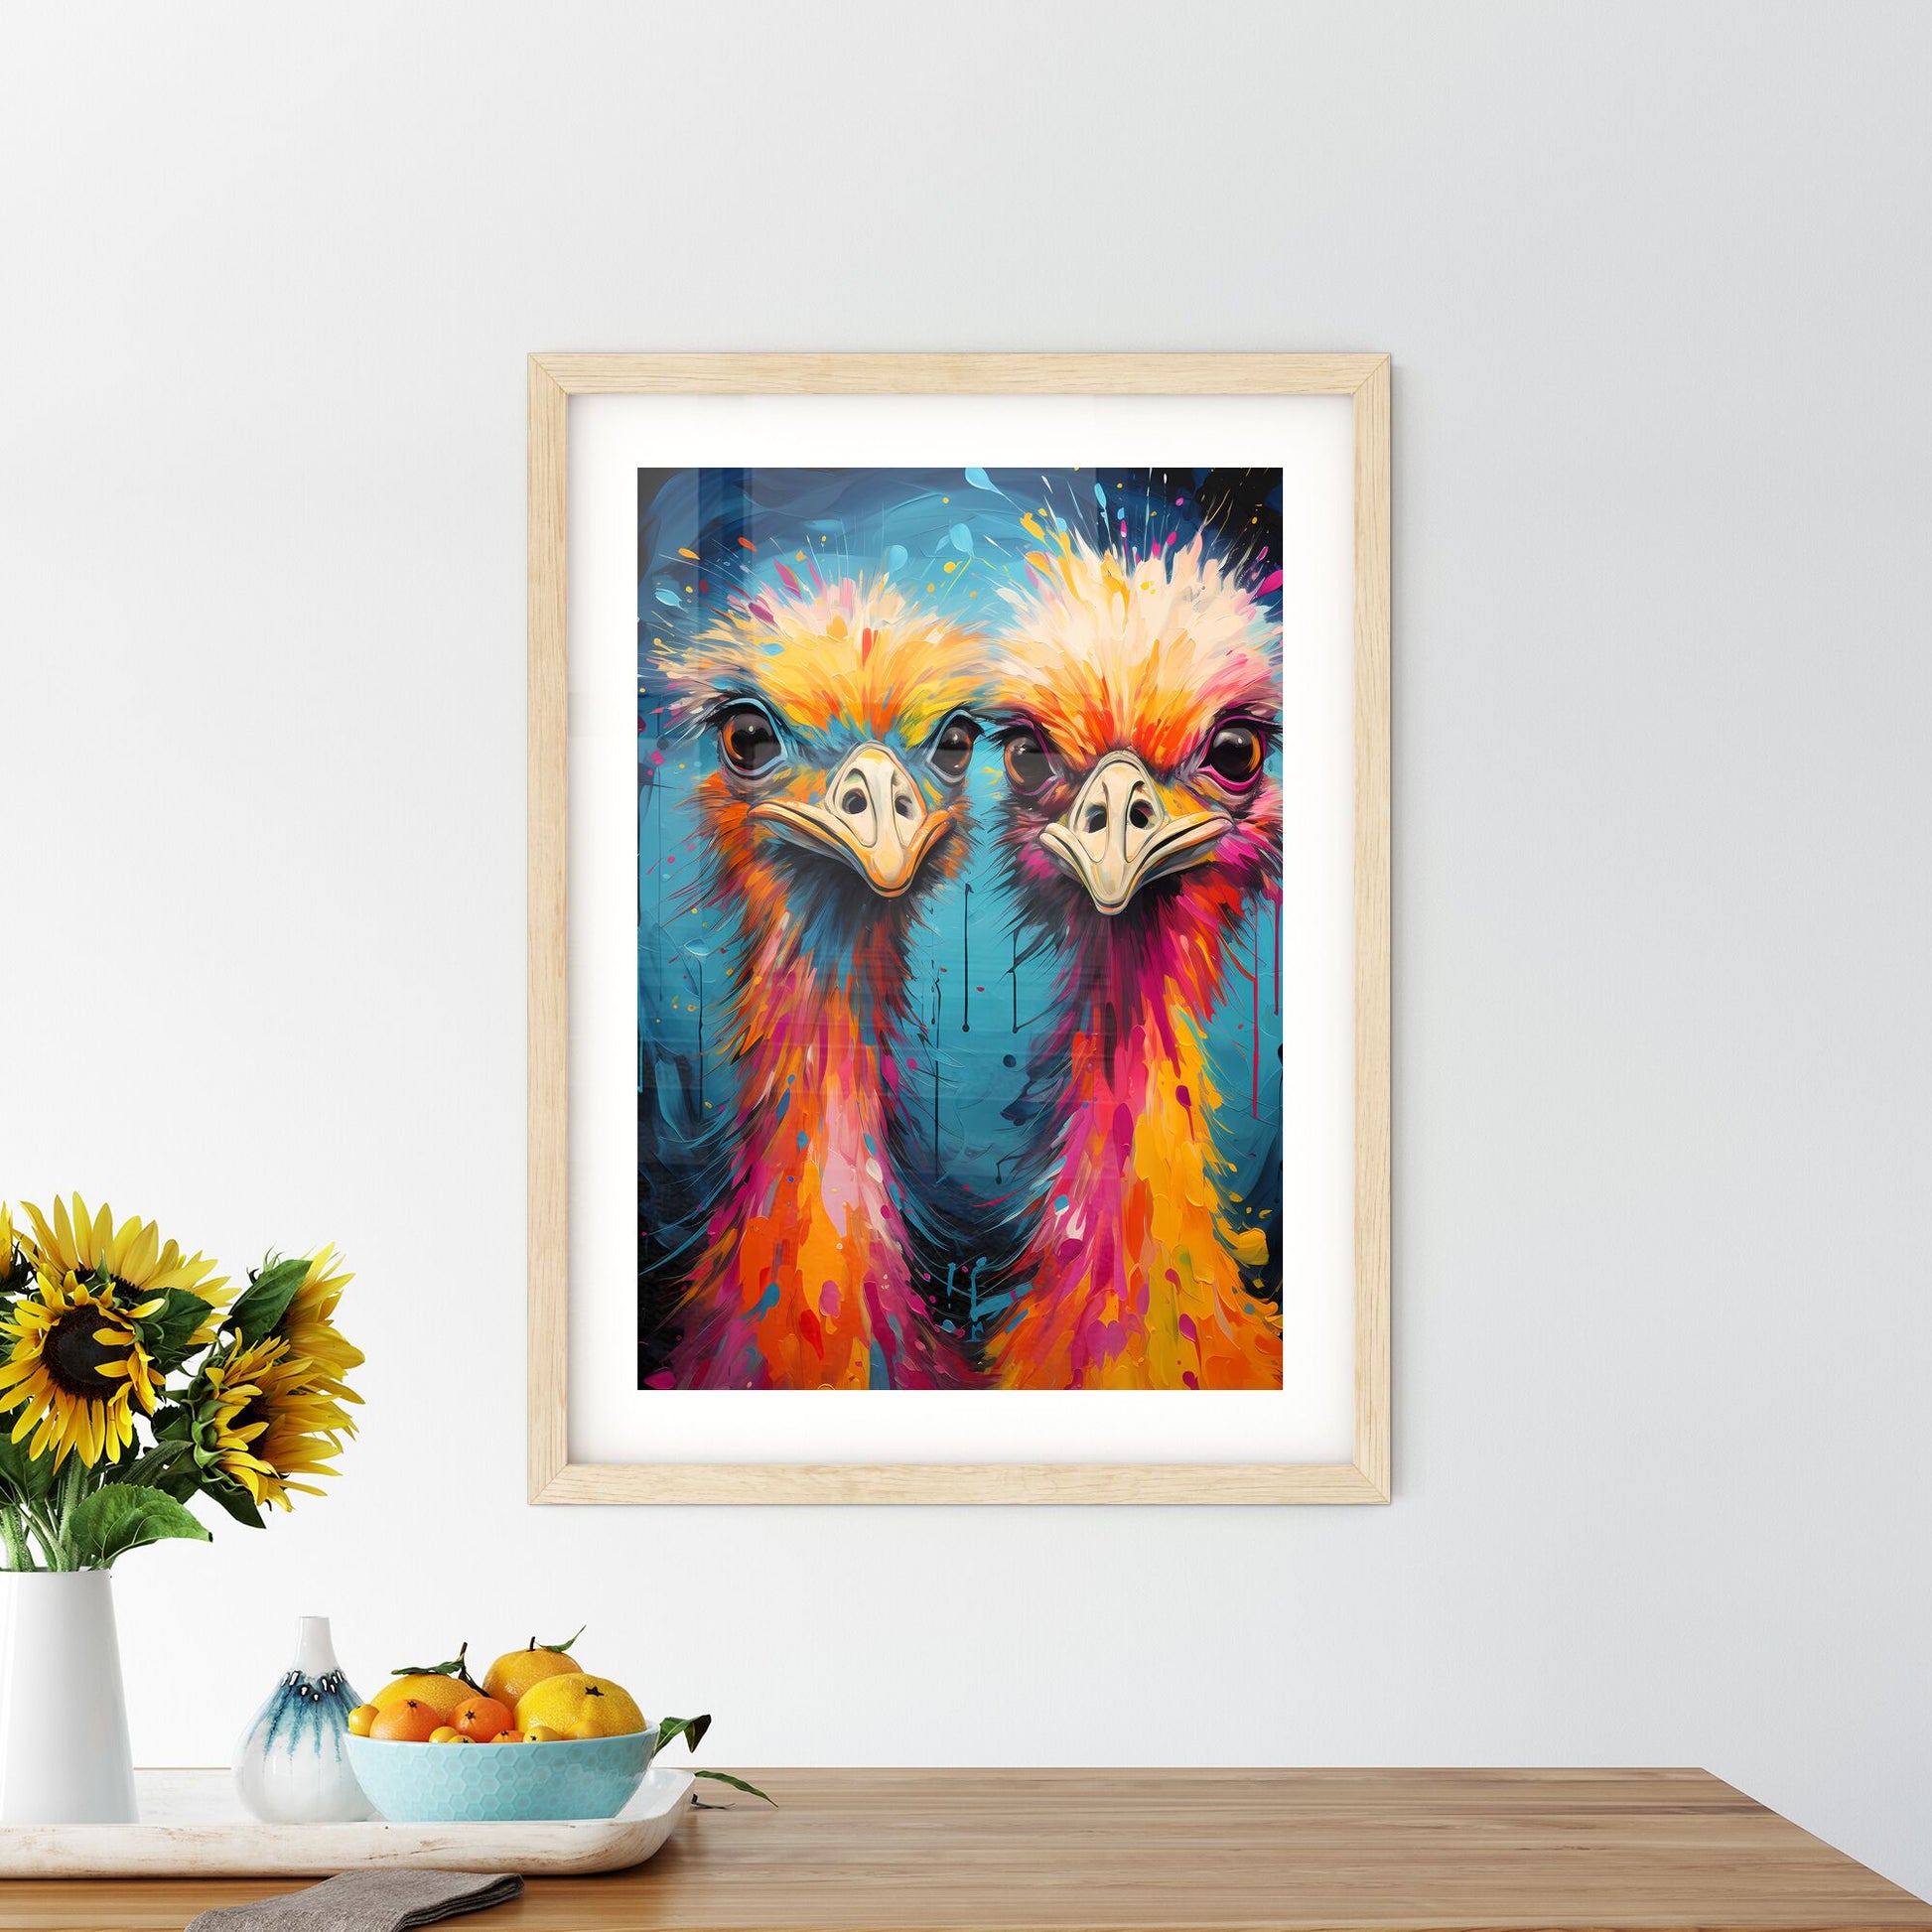 A Pair Of Ostrich In Africa - A Painting Of Two Colorful Ostriches Default Title